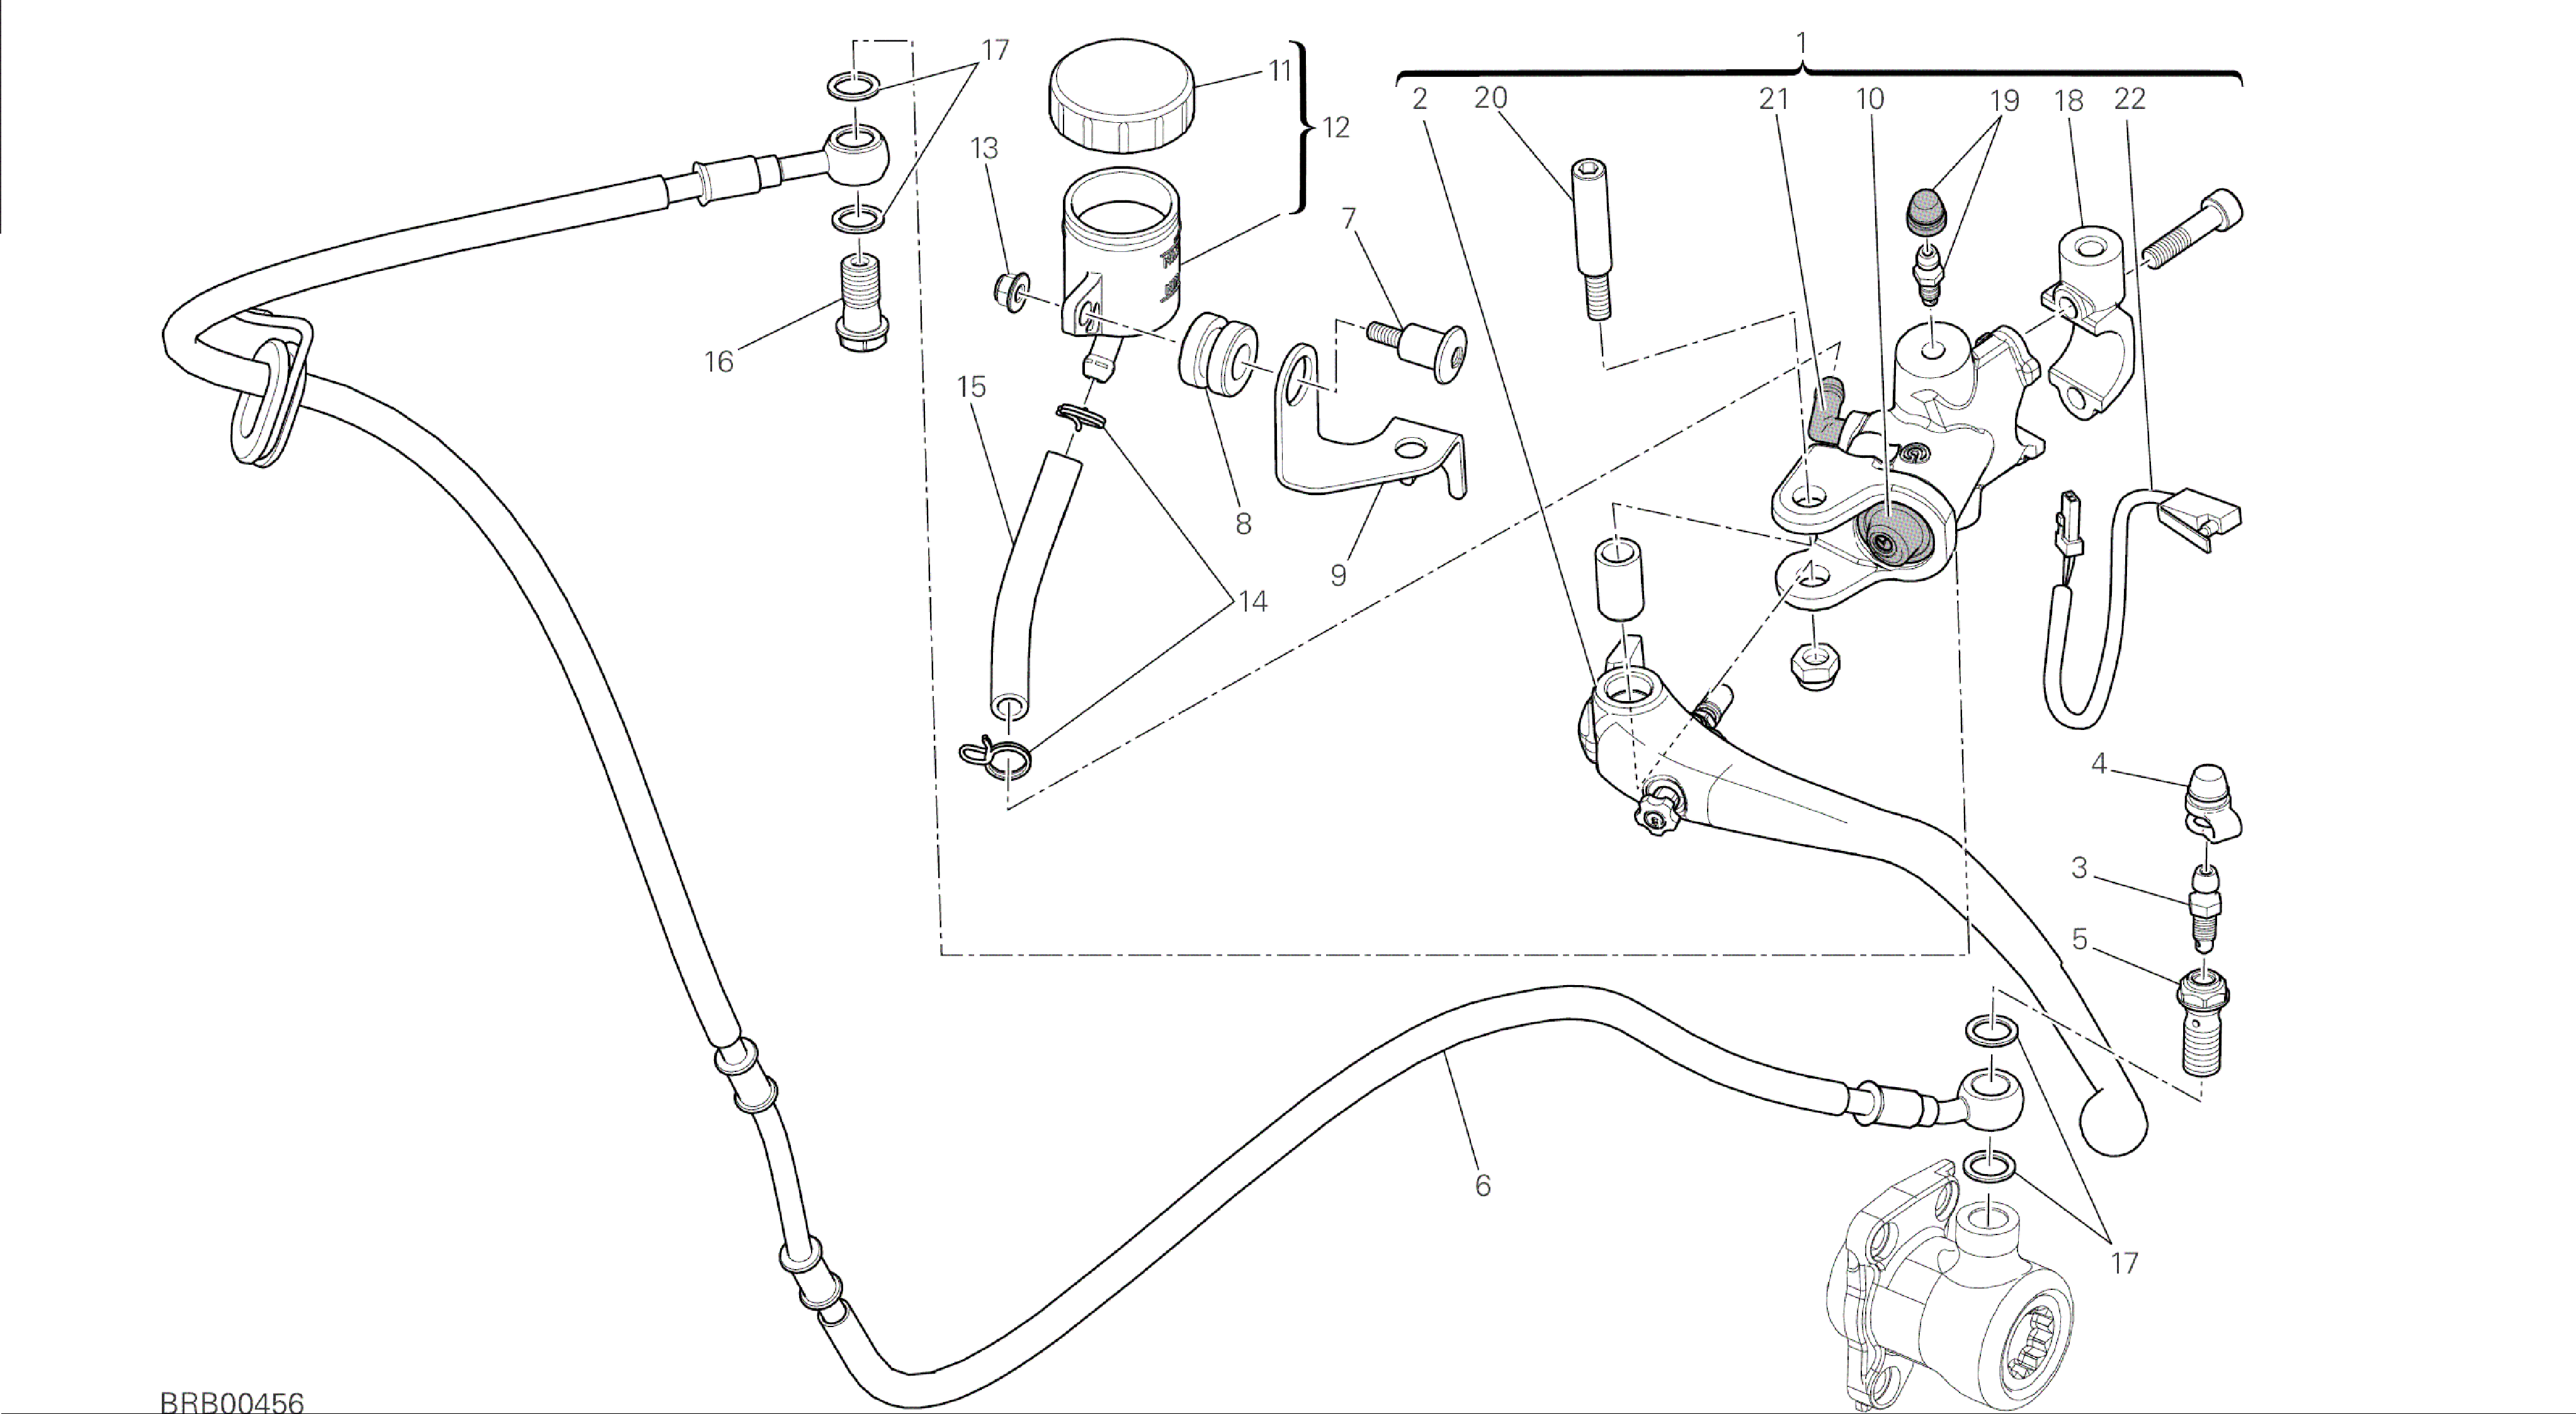 DRAWING 023 - CLUTCH CONTROL [MOD:M 1200]GROUP FRAME